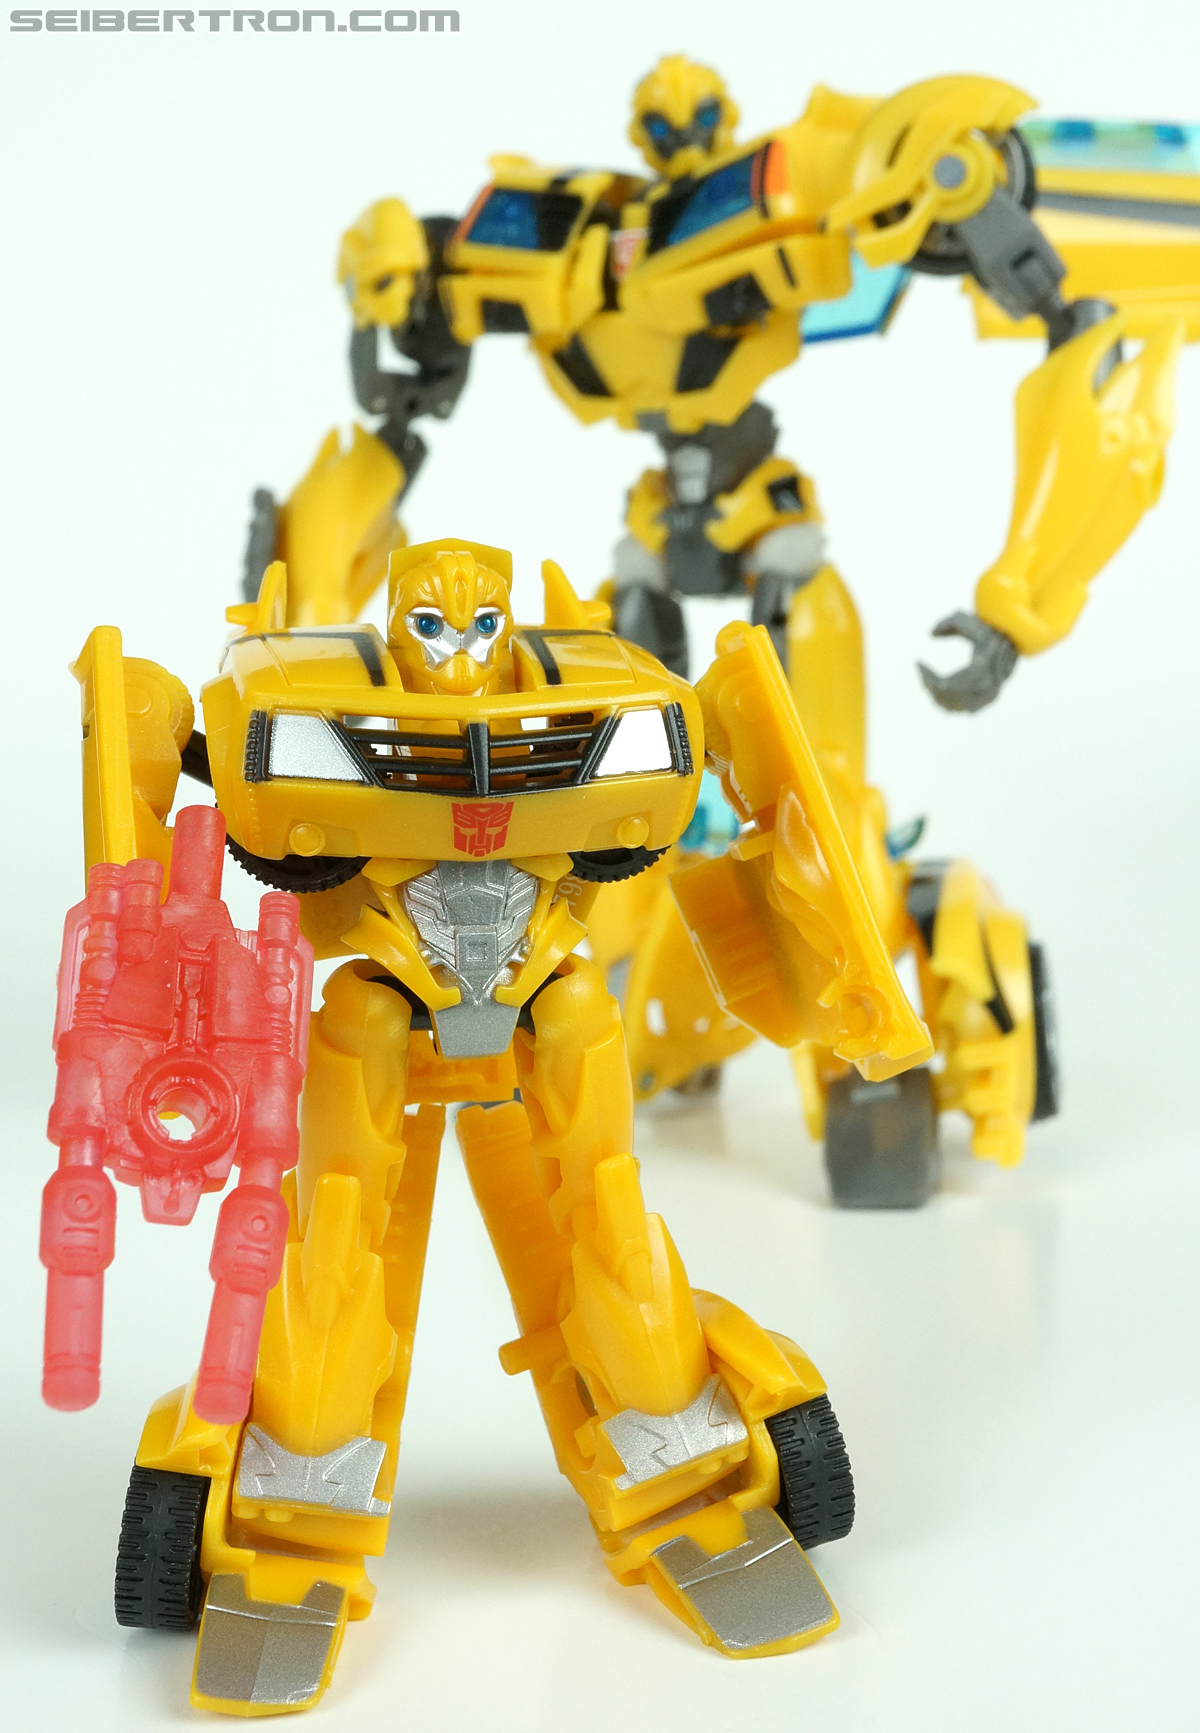 Transformers Prime: Cyberverse Bumblebee (Image #105 of 110)